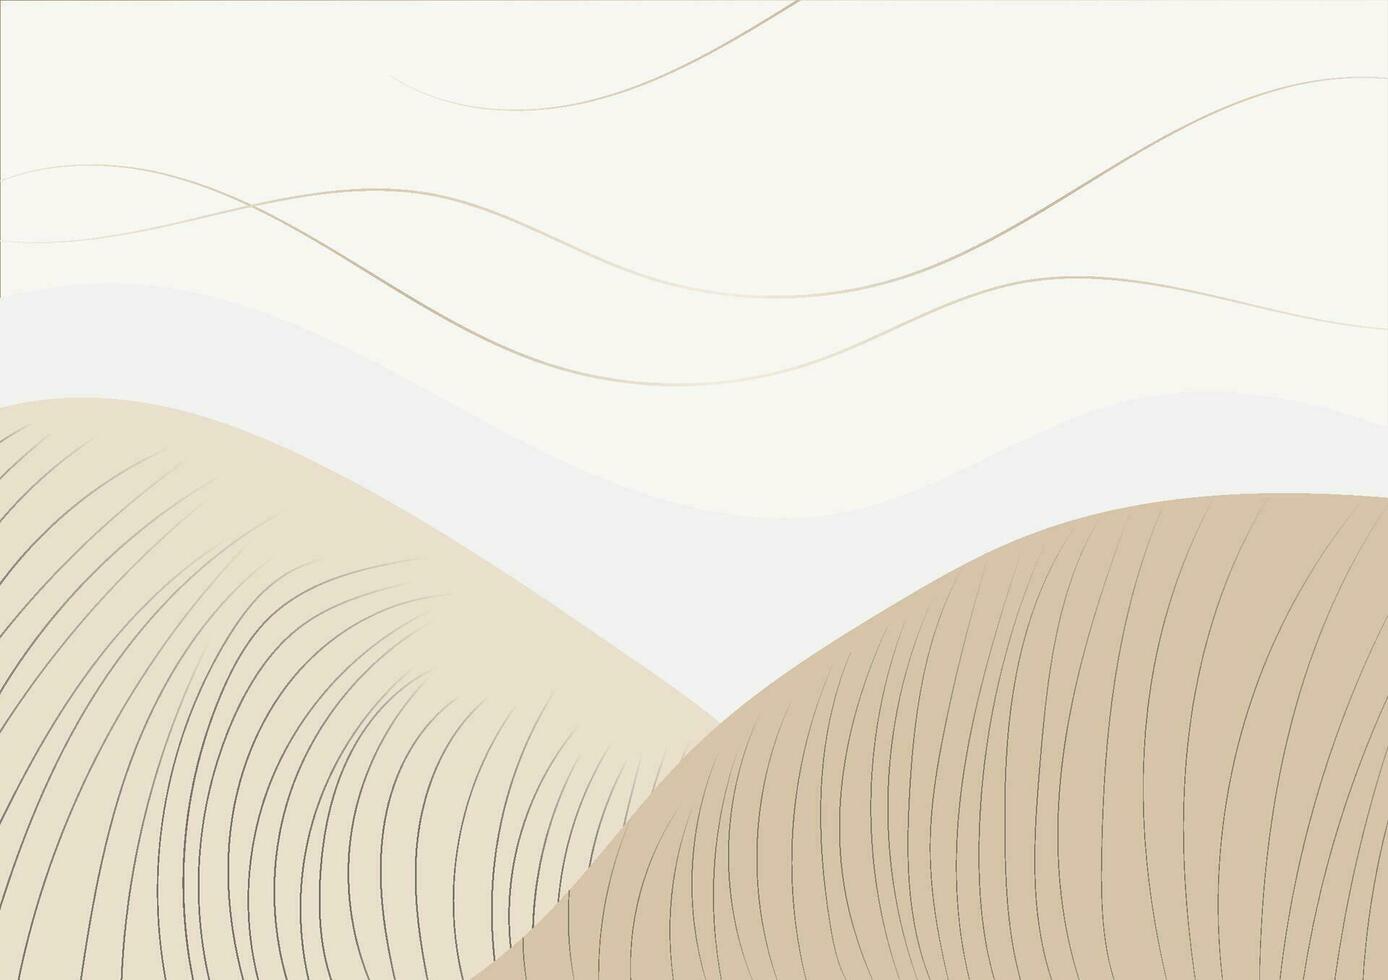 Abstract art background The lines are arranged in order to design the background, using white mixed with brown. To look minimal and modern. Suitable for wallpaper, posters, and fabric patterns. vector